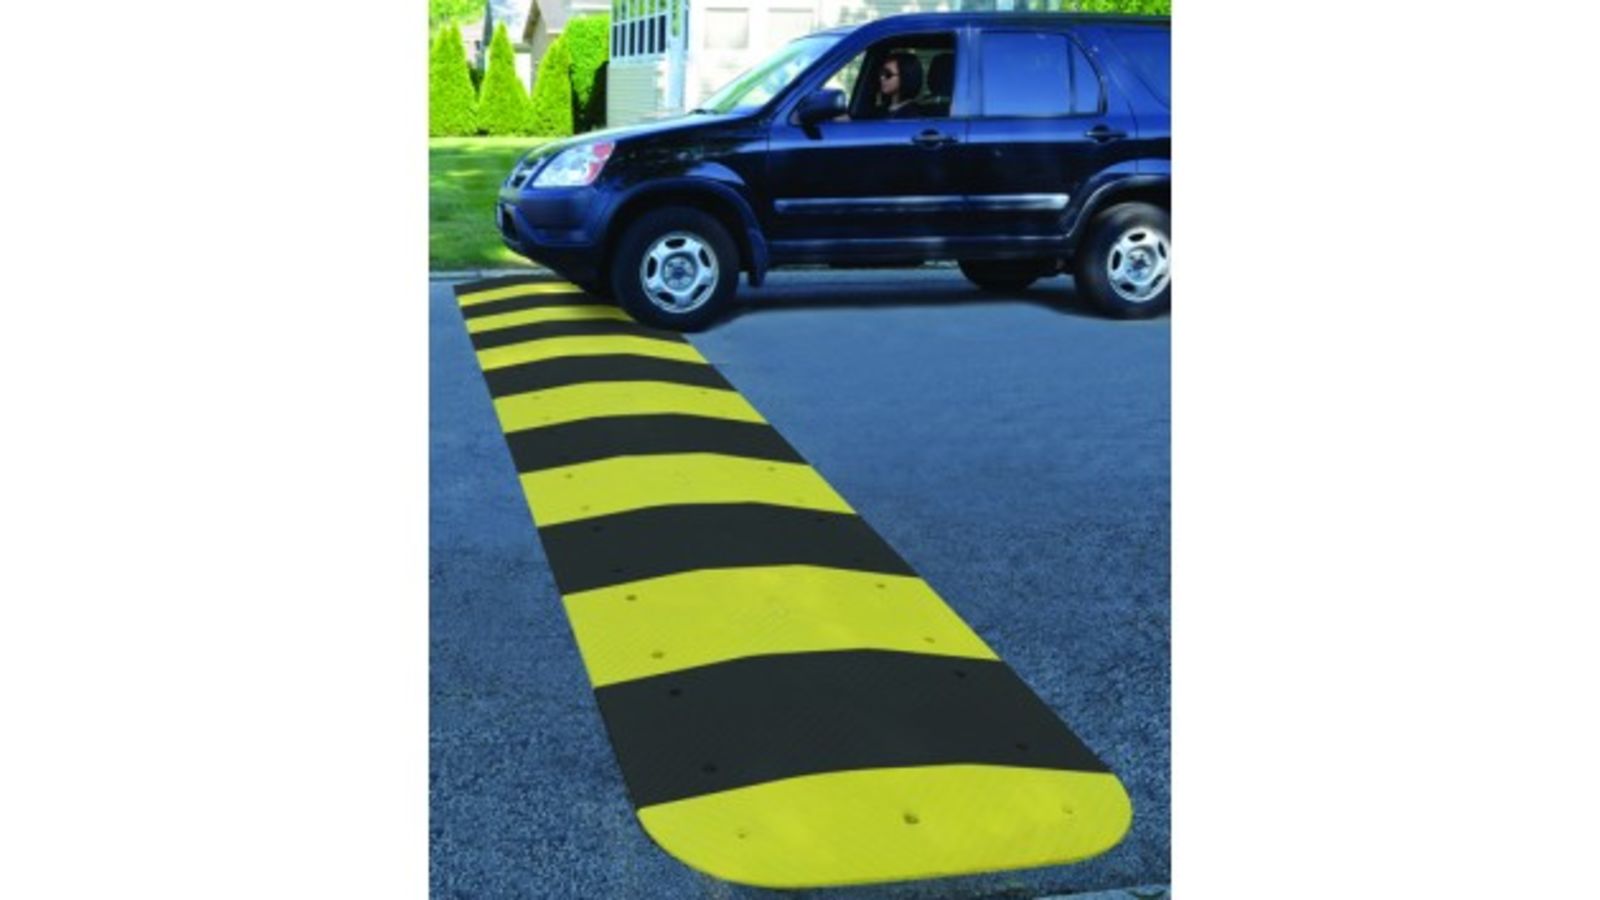 Illustration for article titled About those speed bumps